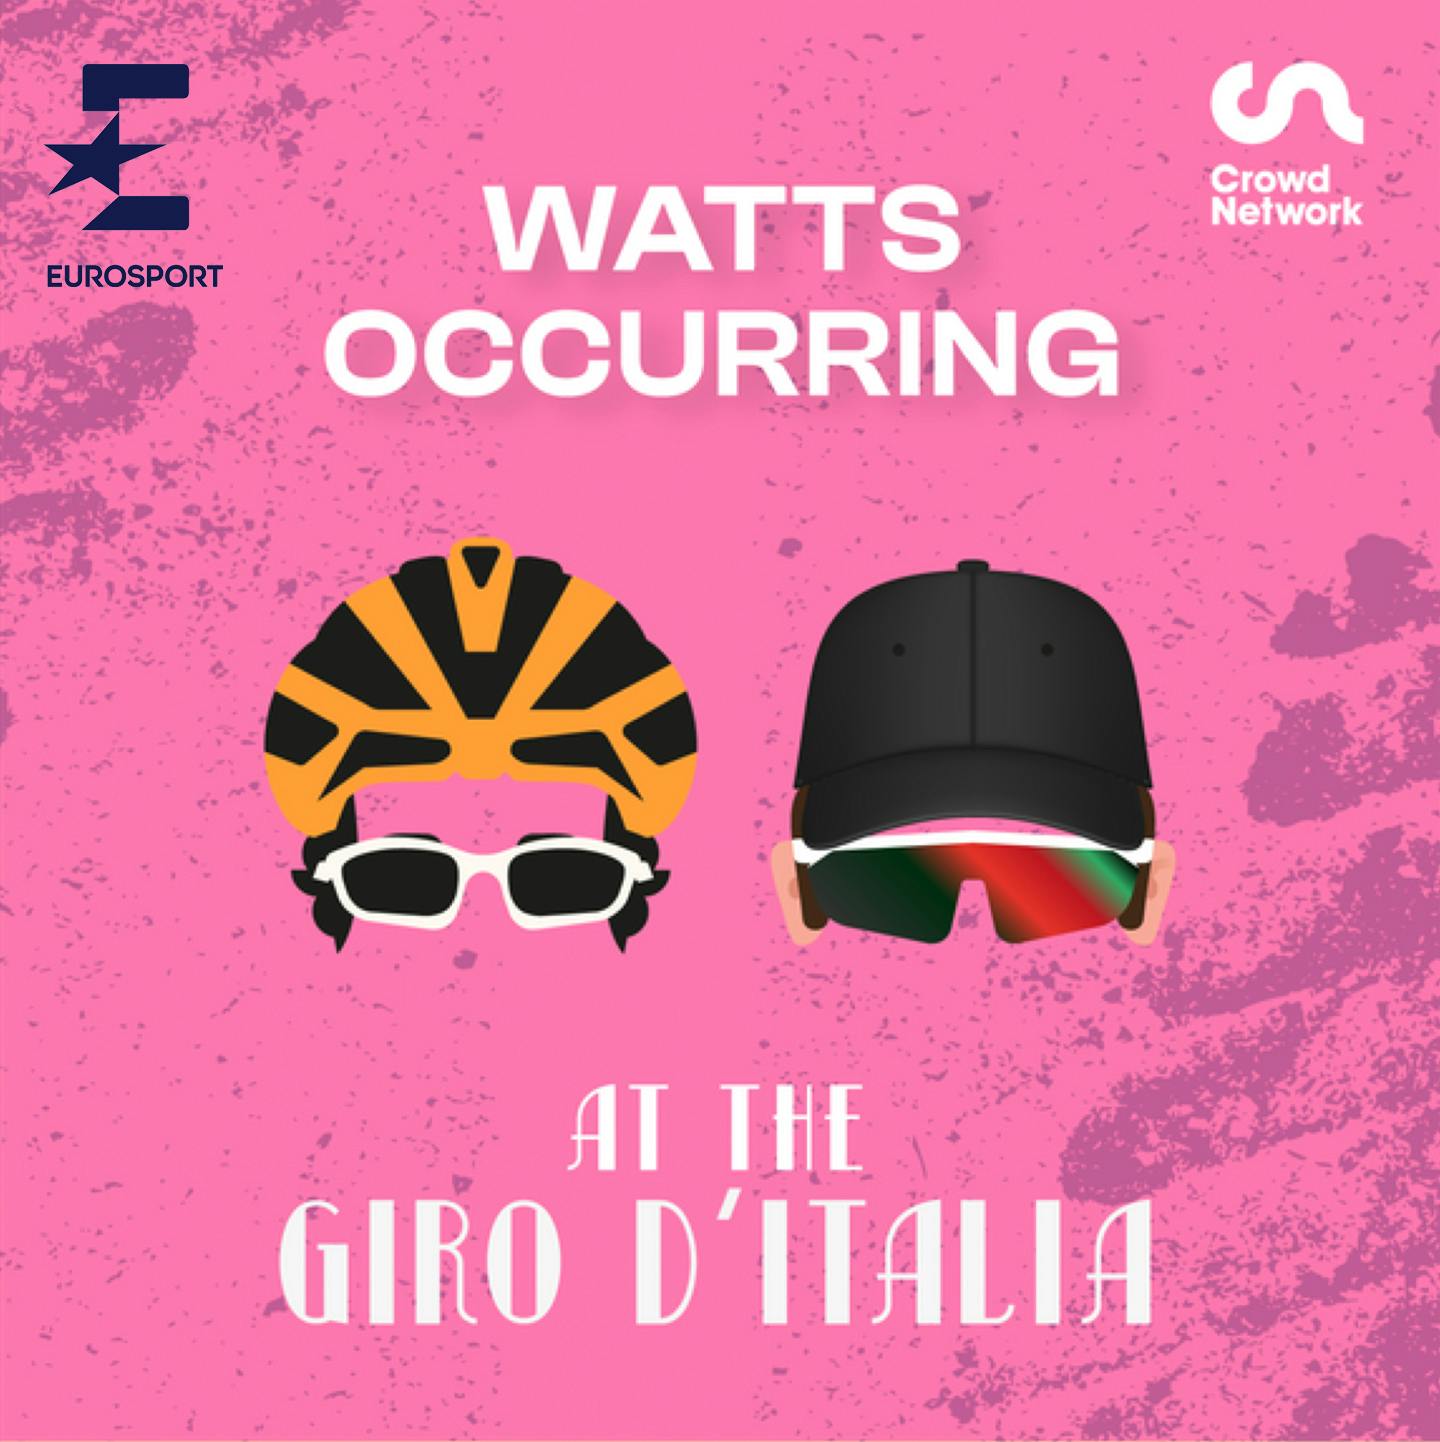 The calm before G's weekend storm | Giro d'Italia stage 12 - Watts Occurring powered by Eurosport